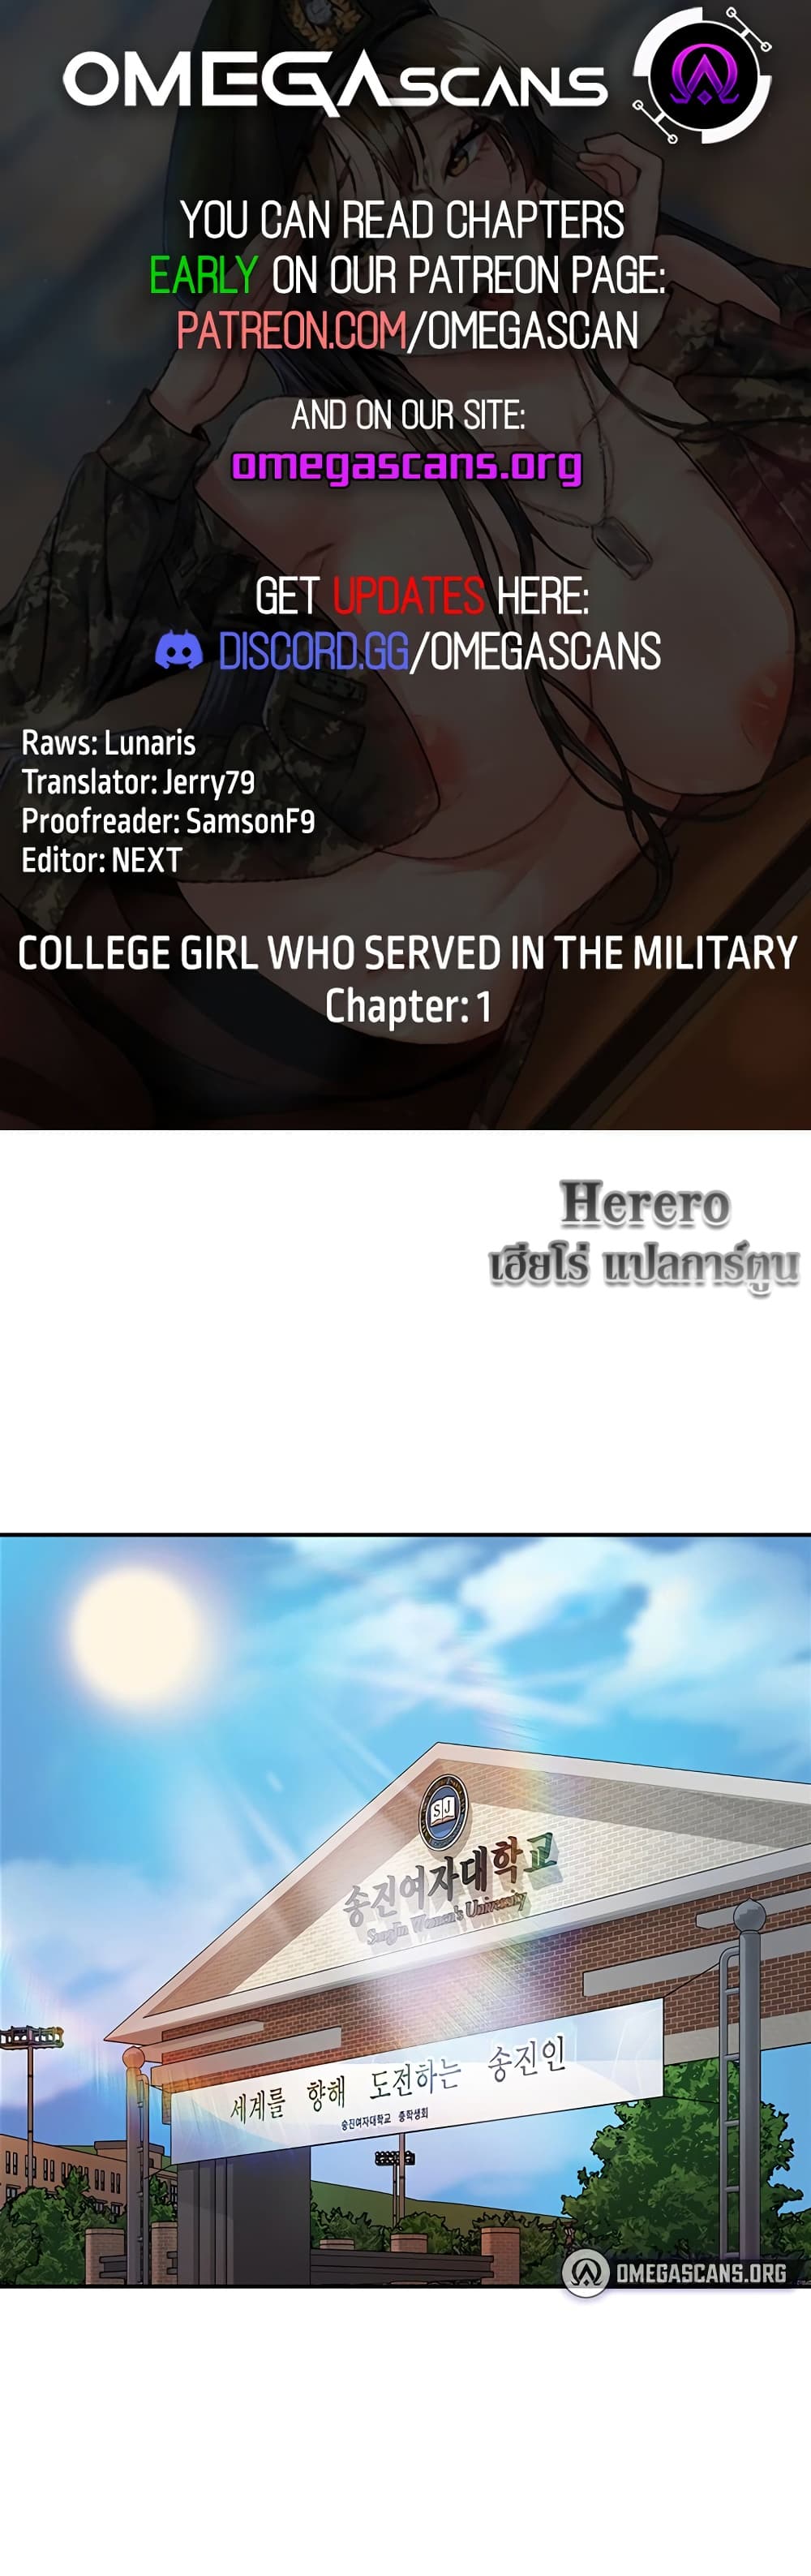 Women’s University Student who Served in the Military 1-1